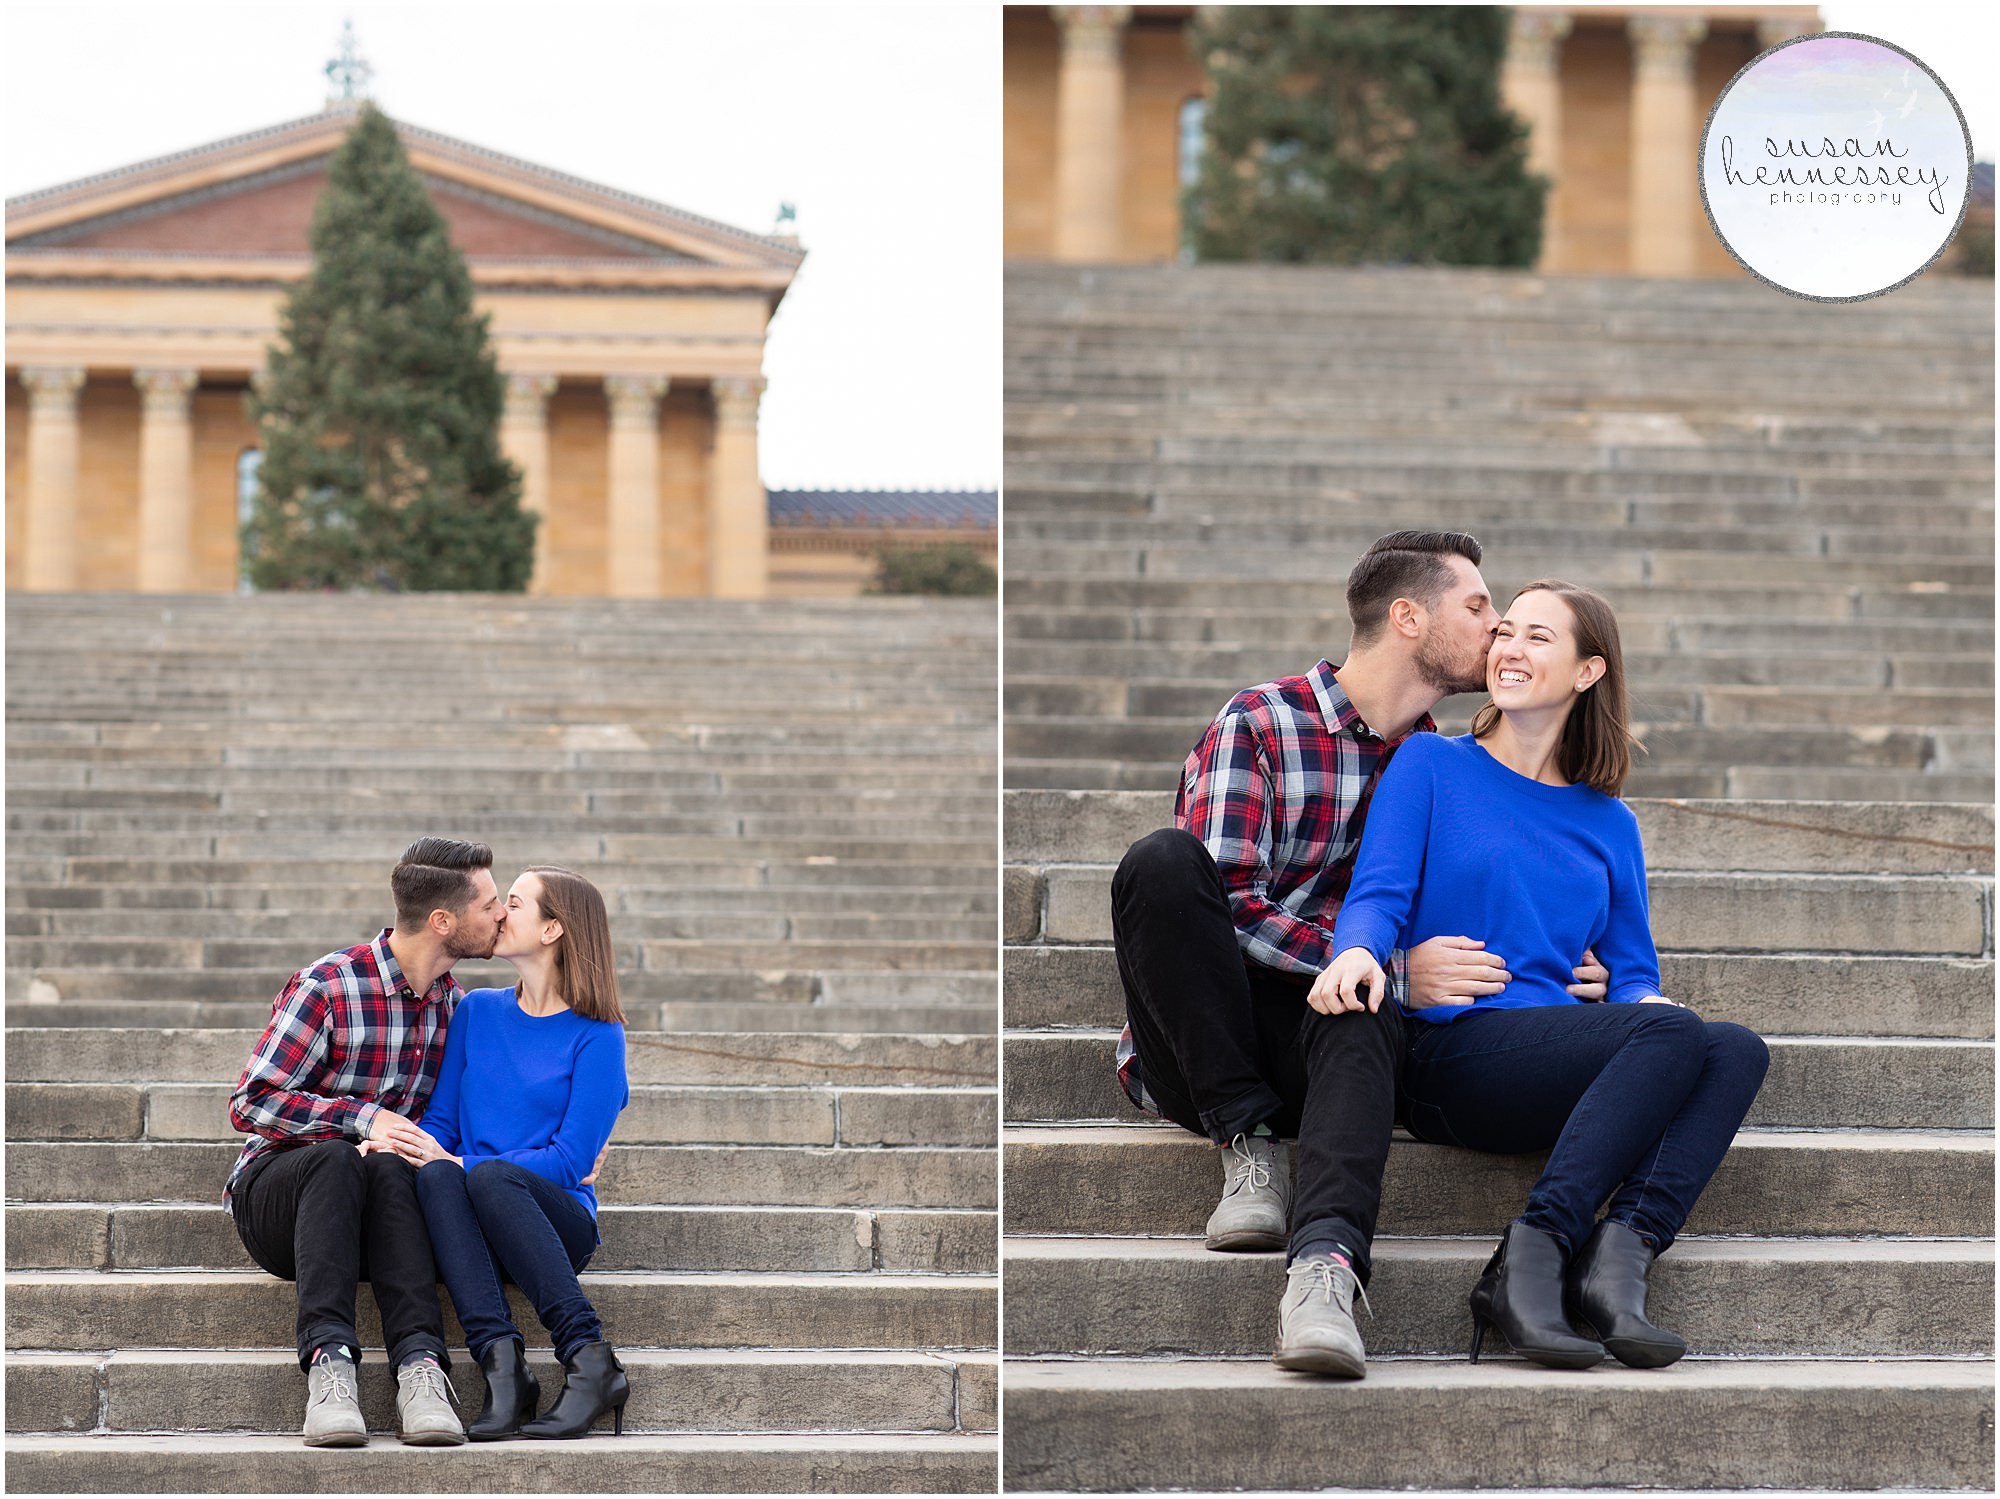 A winter engagement session at the Art Museum in Philly